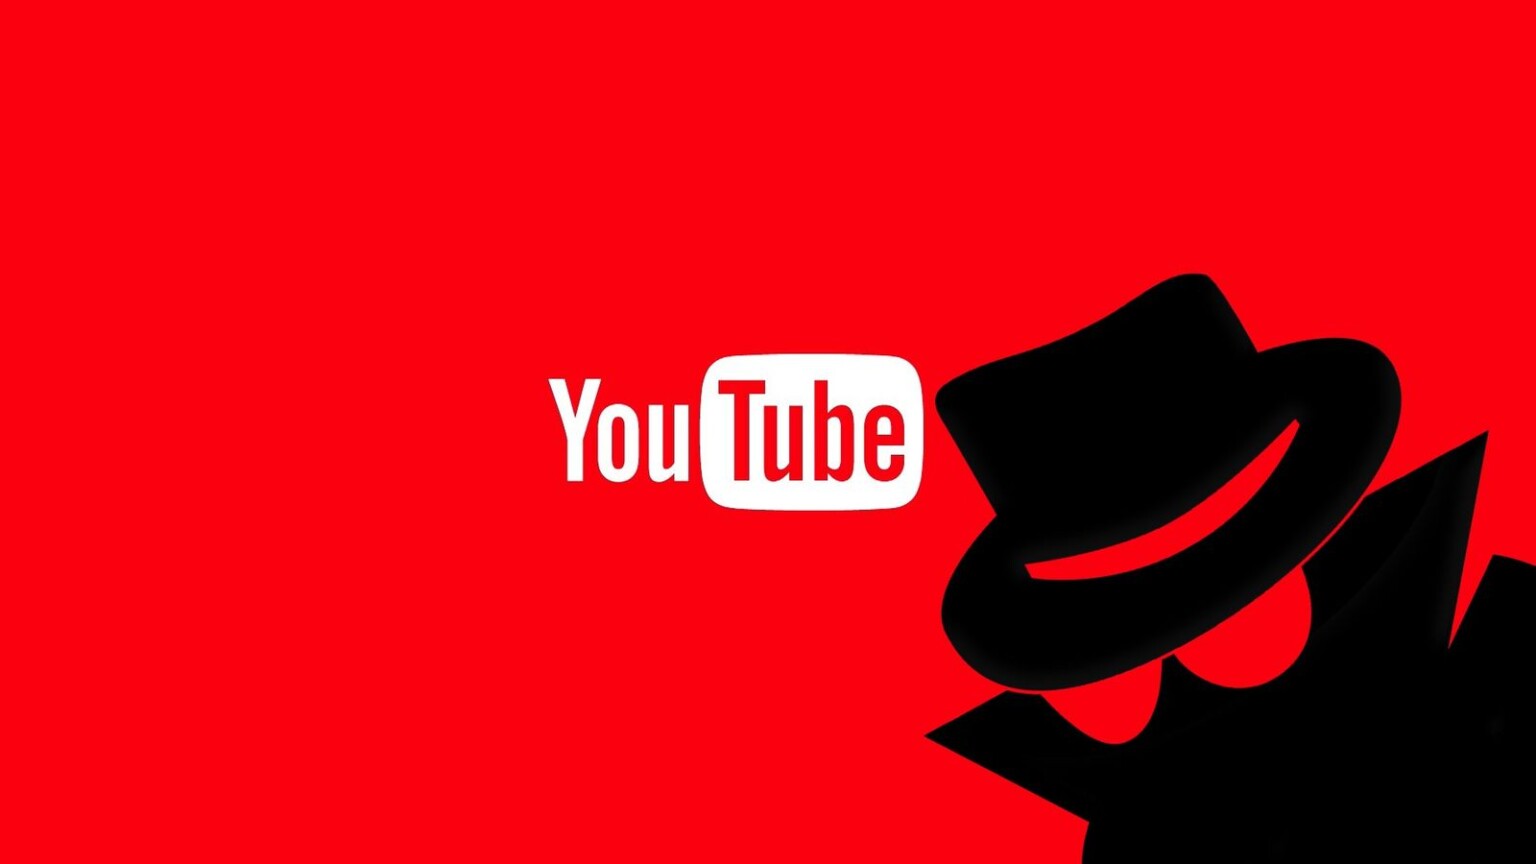 YouTube Officially Introduces Incognito Mode on Android Devices - TechNadu